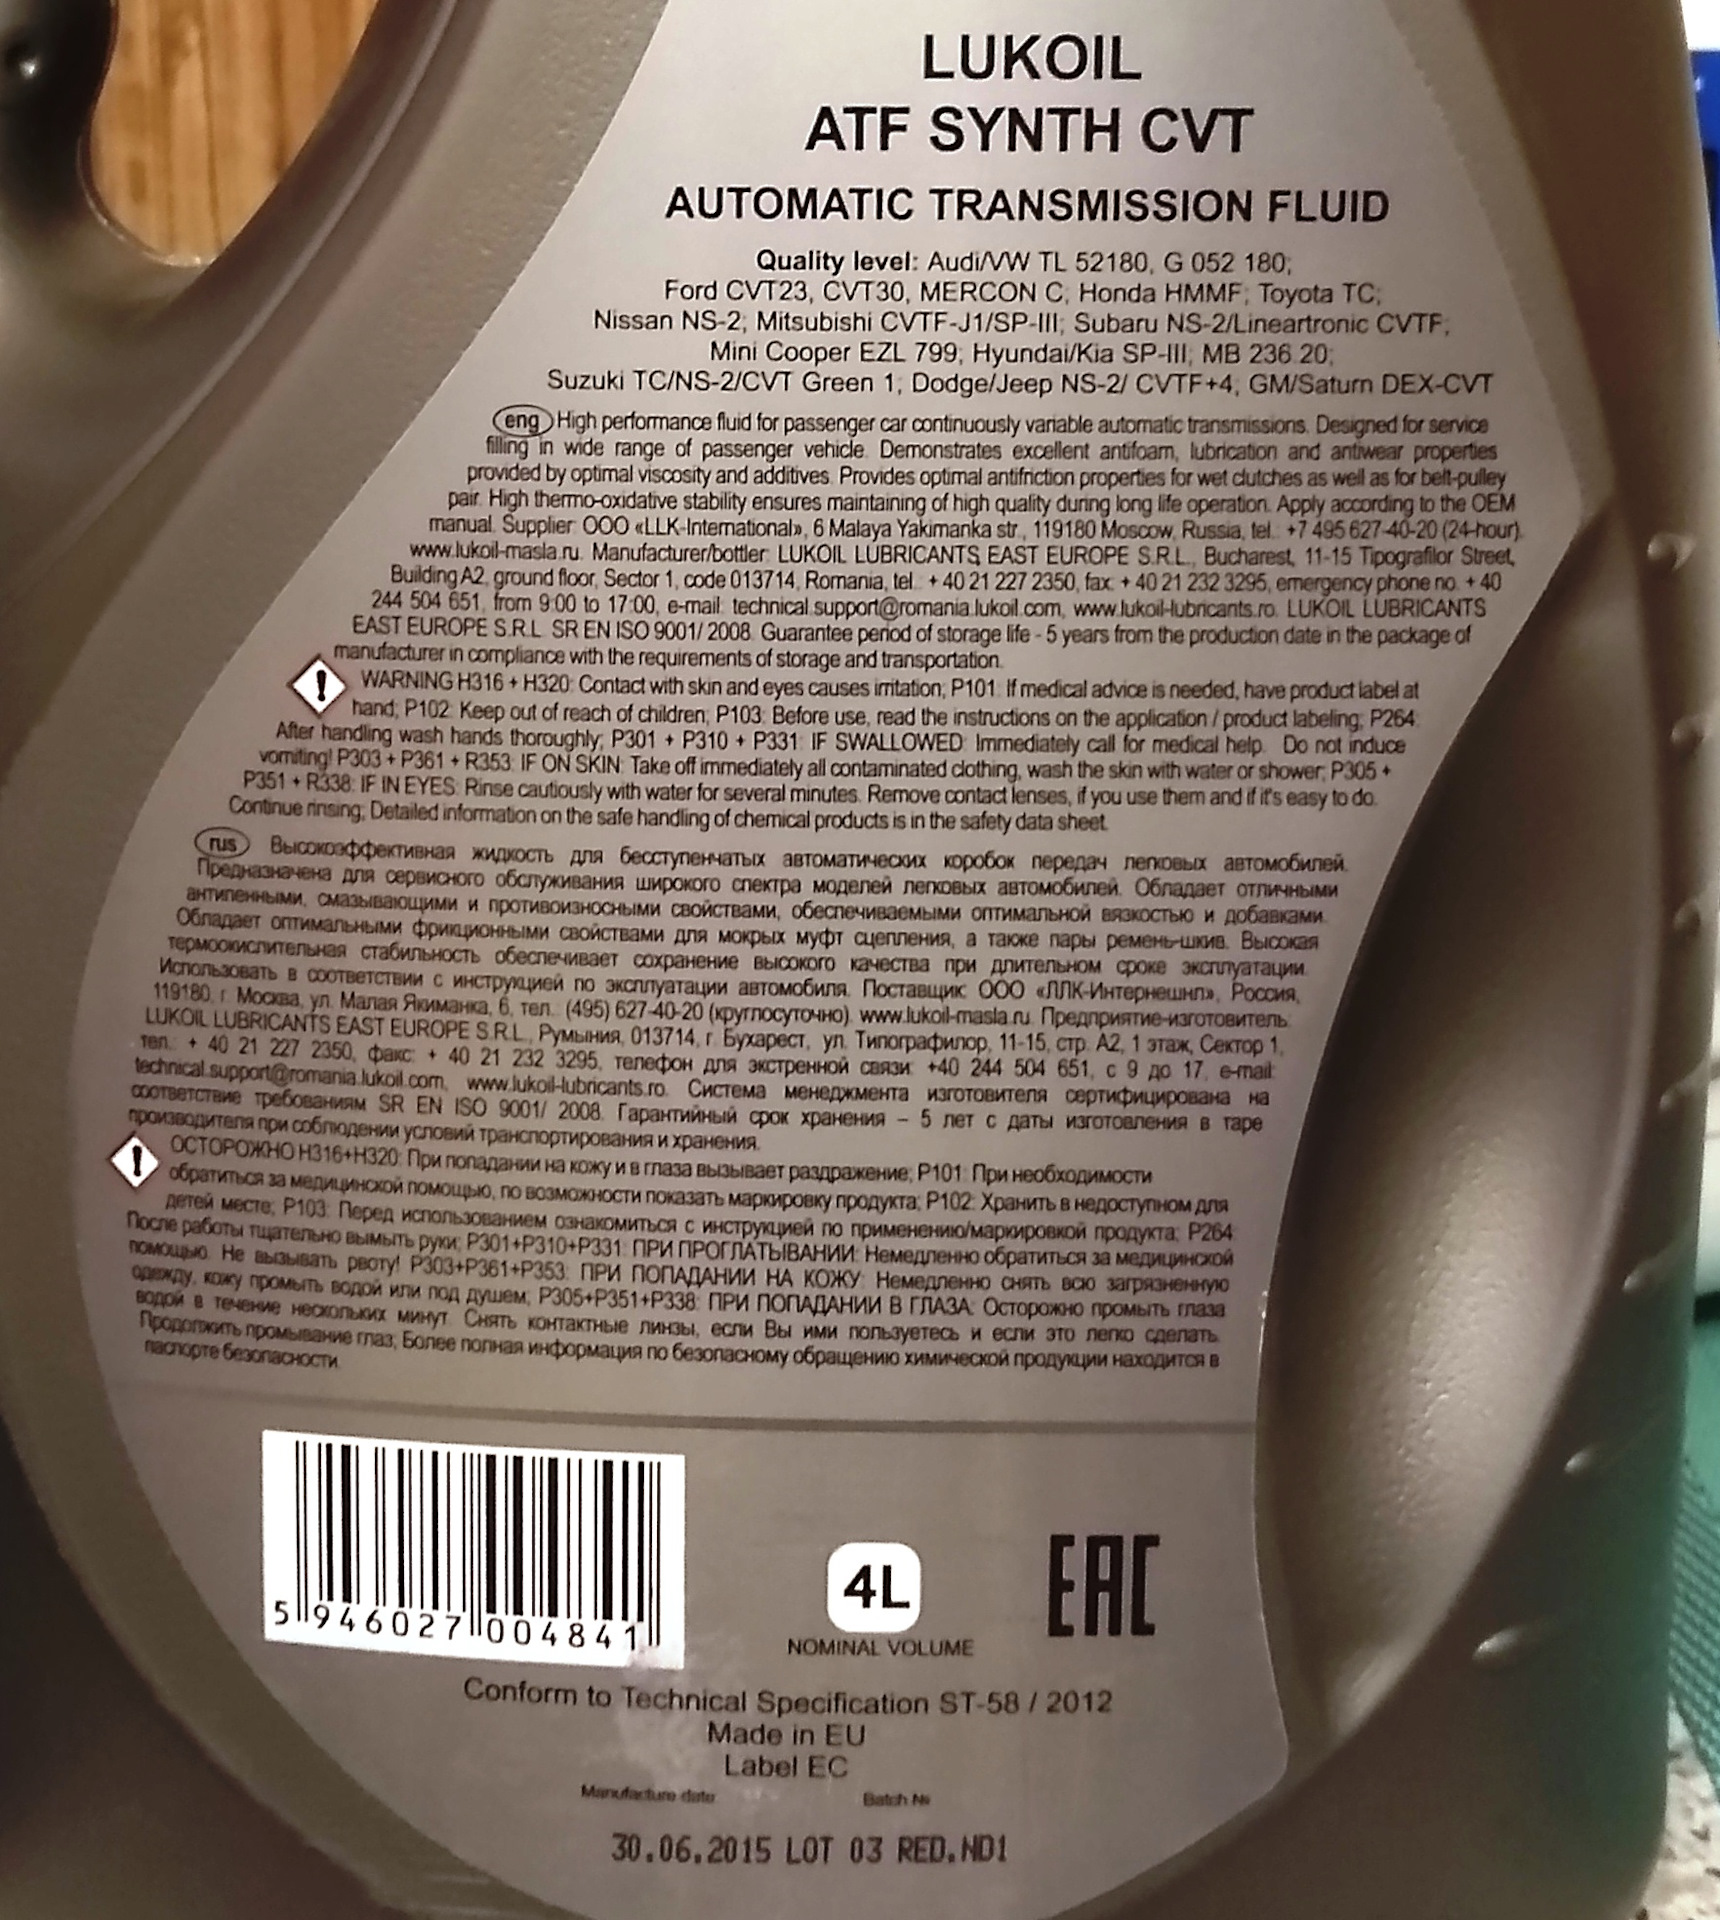 Atf synth multi. Лукойл CVTF. Лукойл для вариатора. Масло Lukoil CVTF. Масло Лукойл CVTF для вариатора.